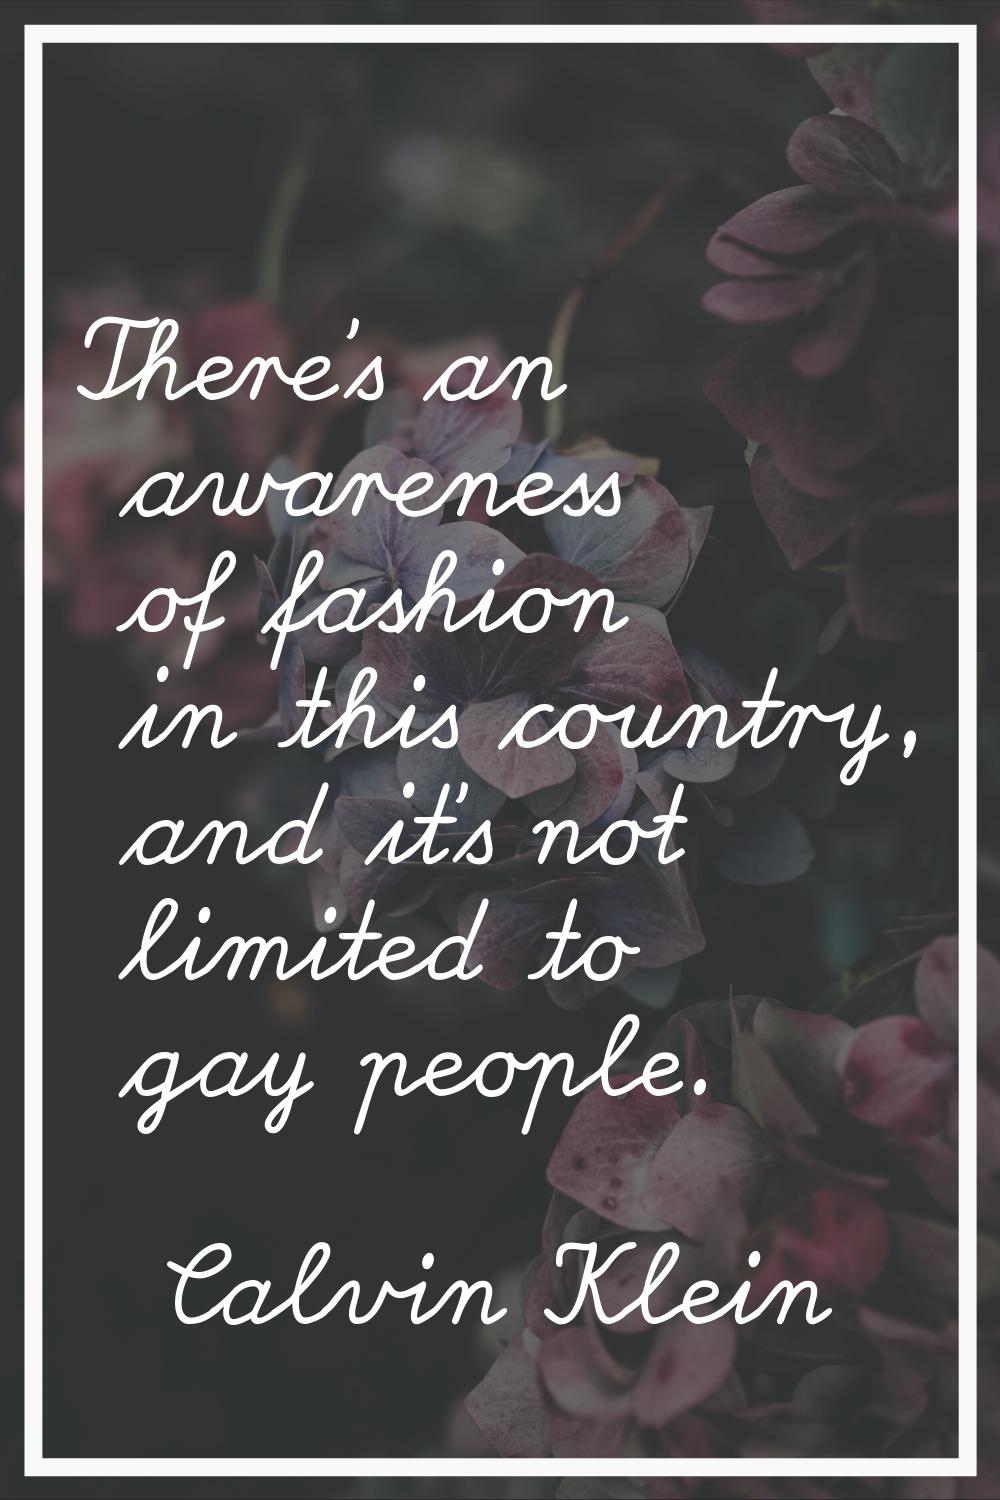 There's an awareness of fashion in this country, and it's not limited to gay people.